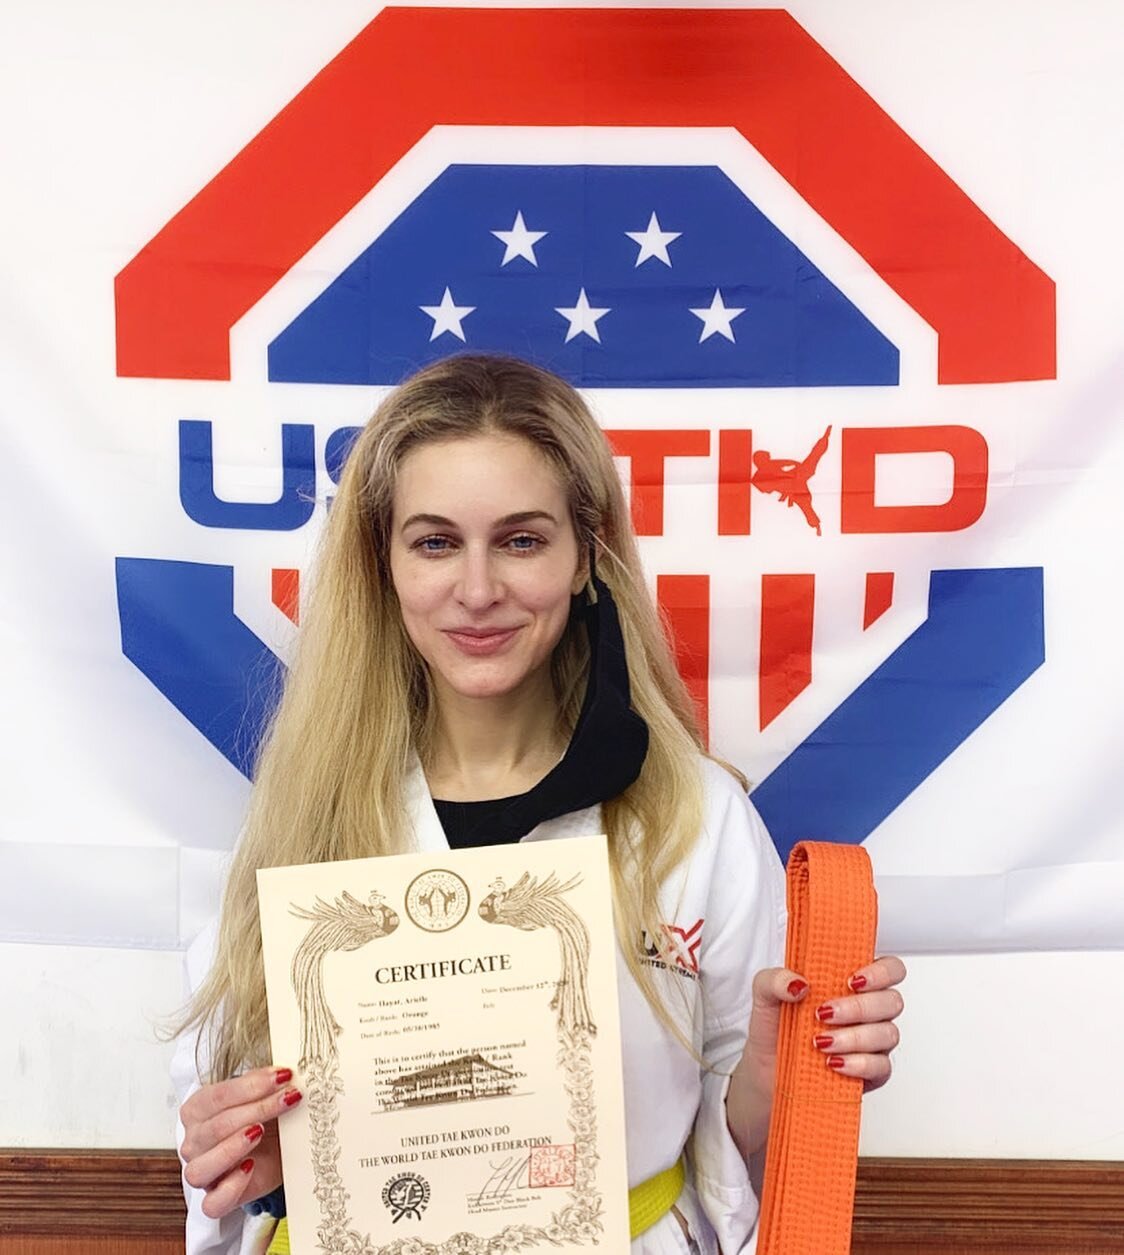 Tonight I am officially an orange belt 🥋 Thank you so much @unitedxtreme_williamsburg it is an honor to train with Master Olga and Master Esteven and all of the amazing staff. #grateful #taekwondo #unitedxtreme #covidaccomplishments